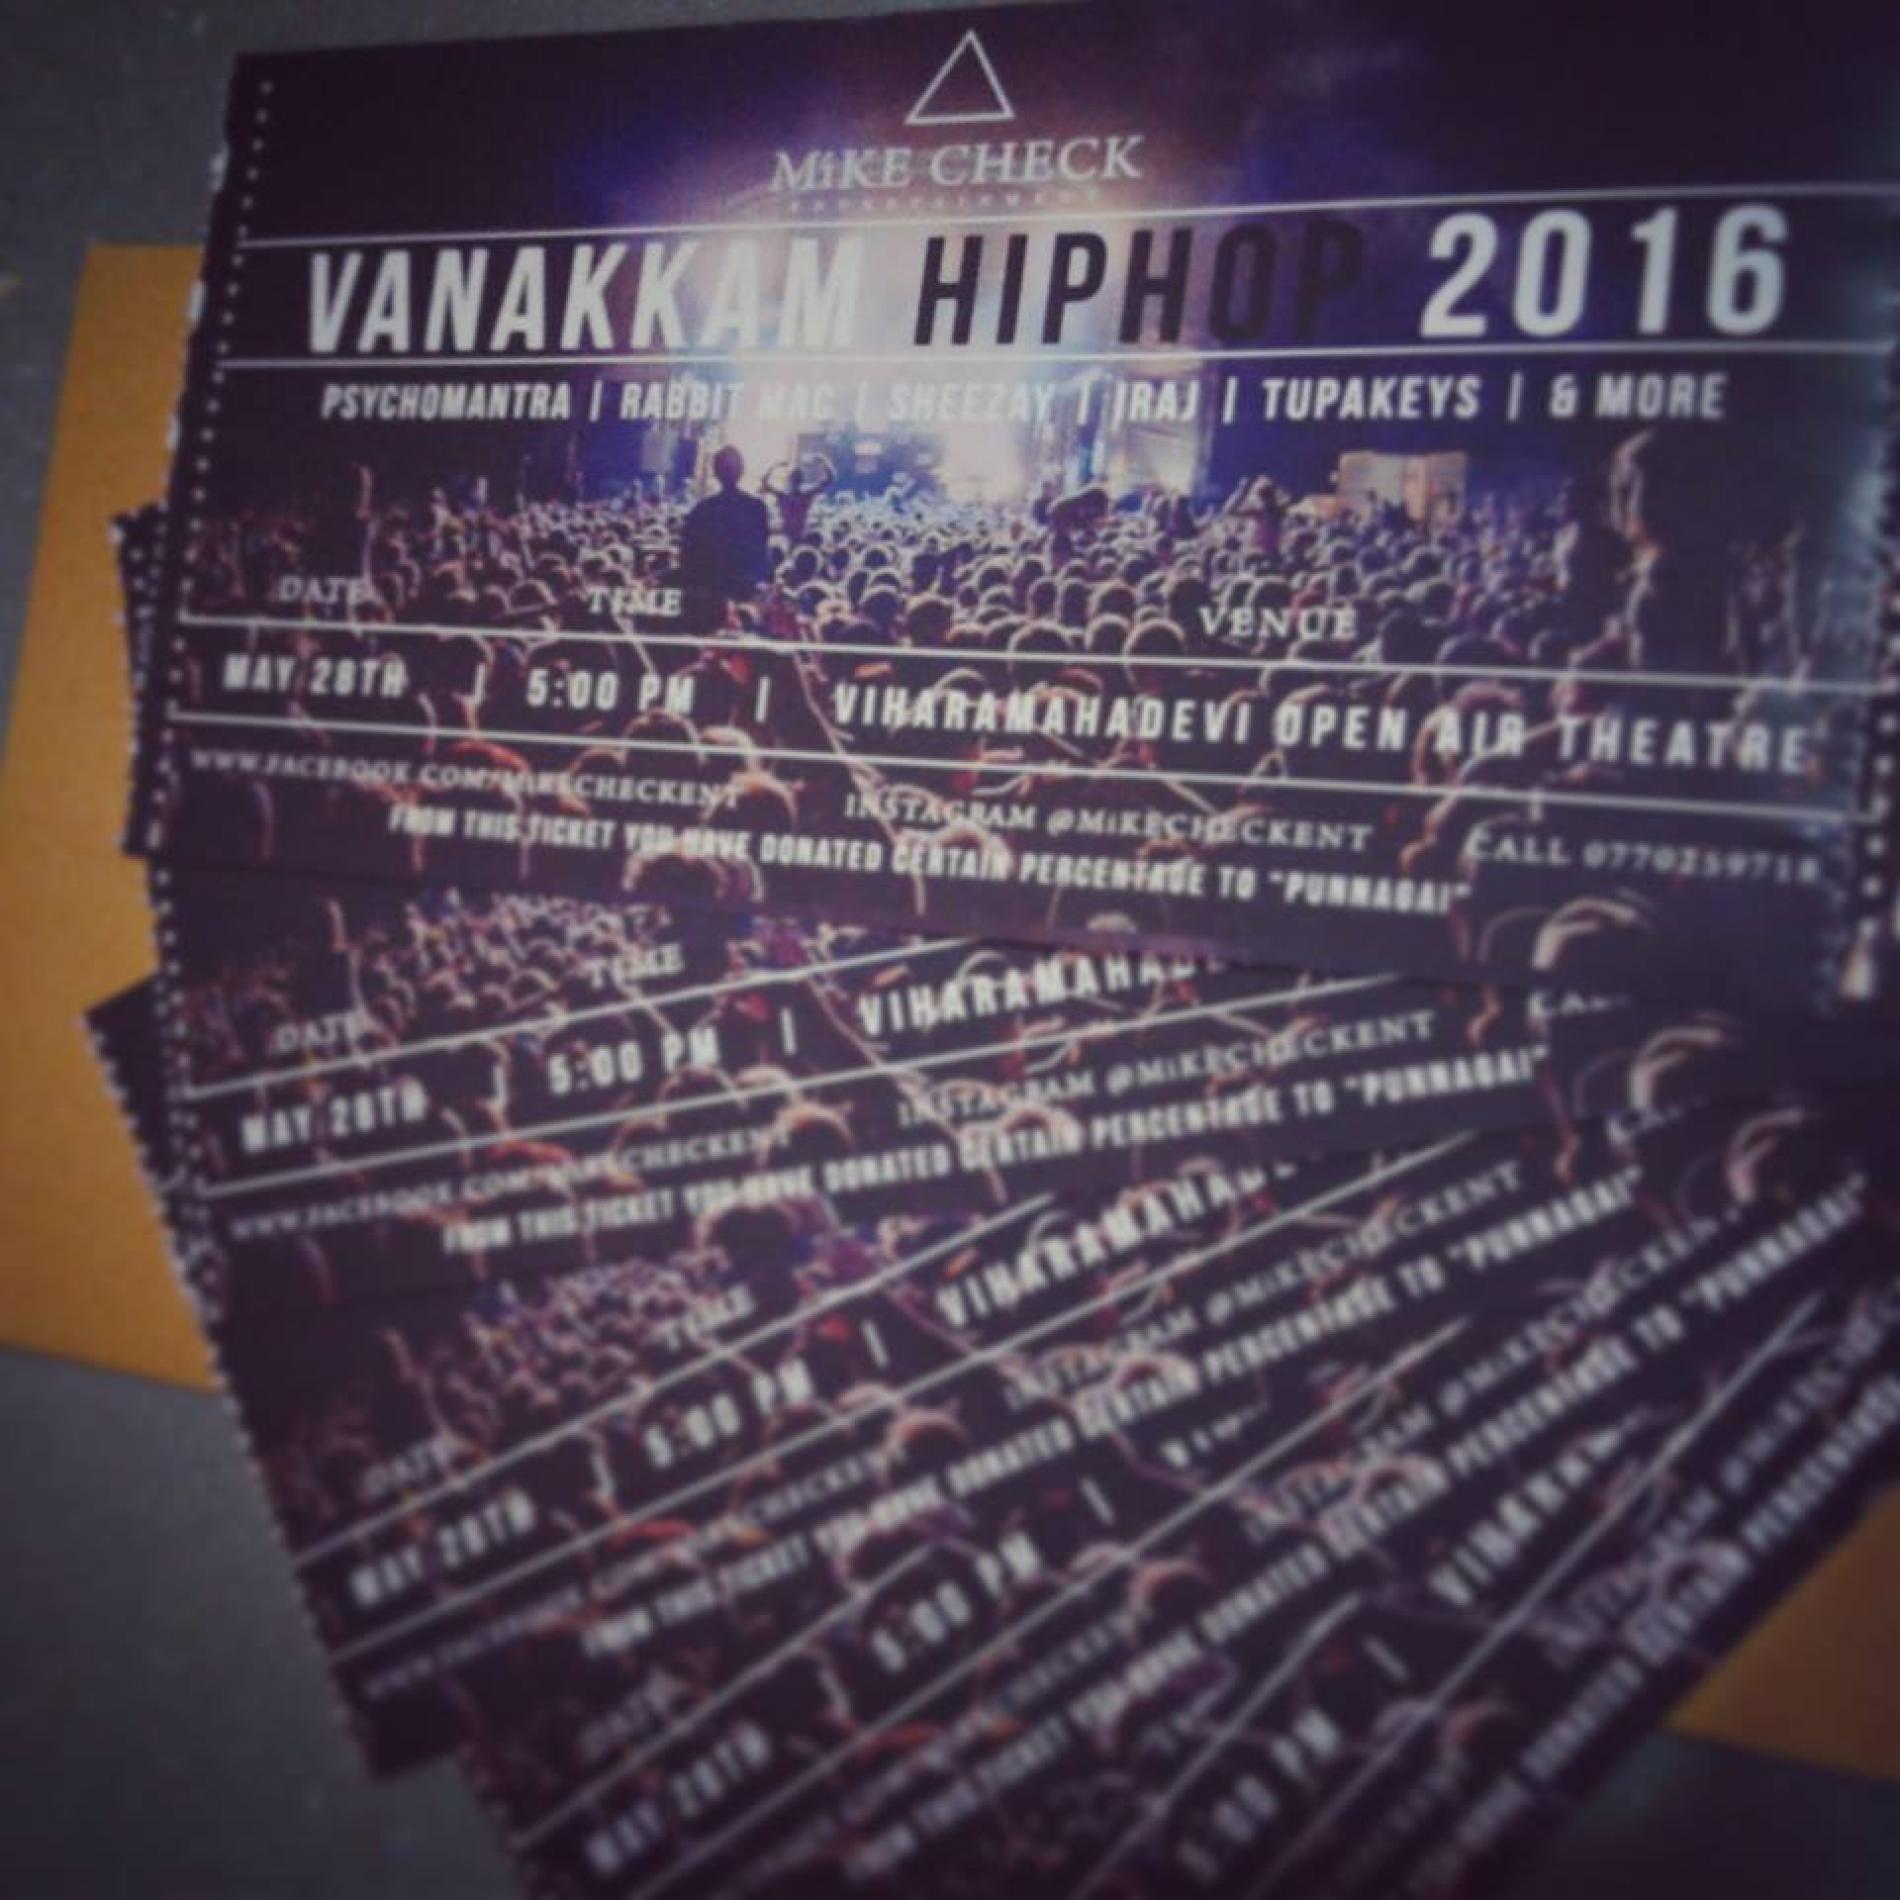 Tickets For #VanakkamHipHop Now On Sale